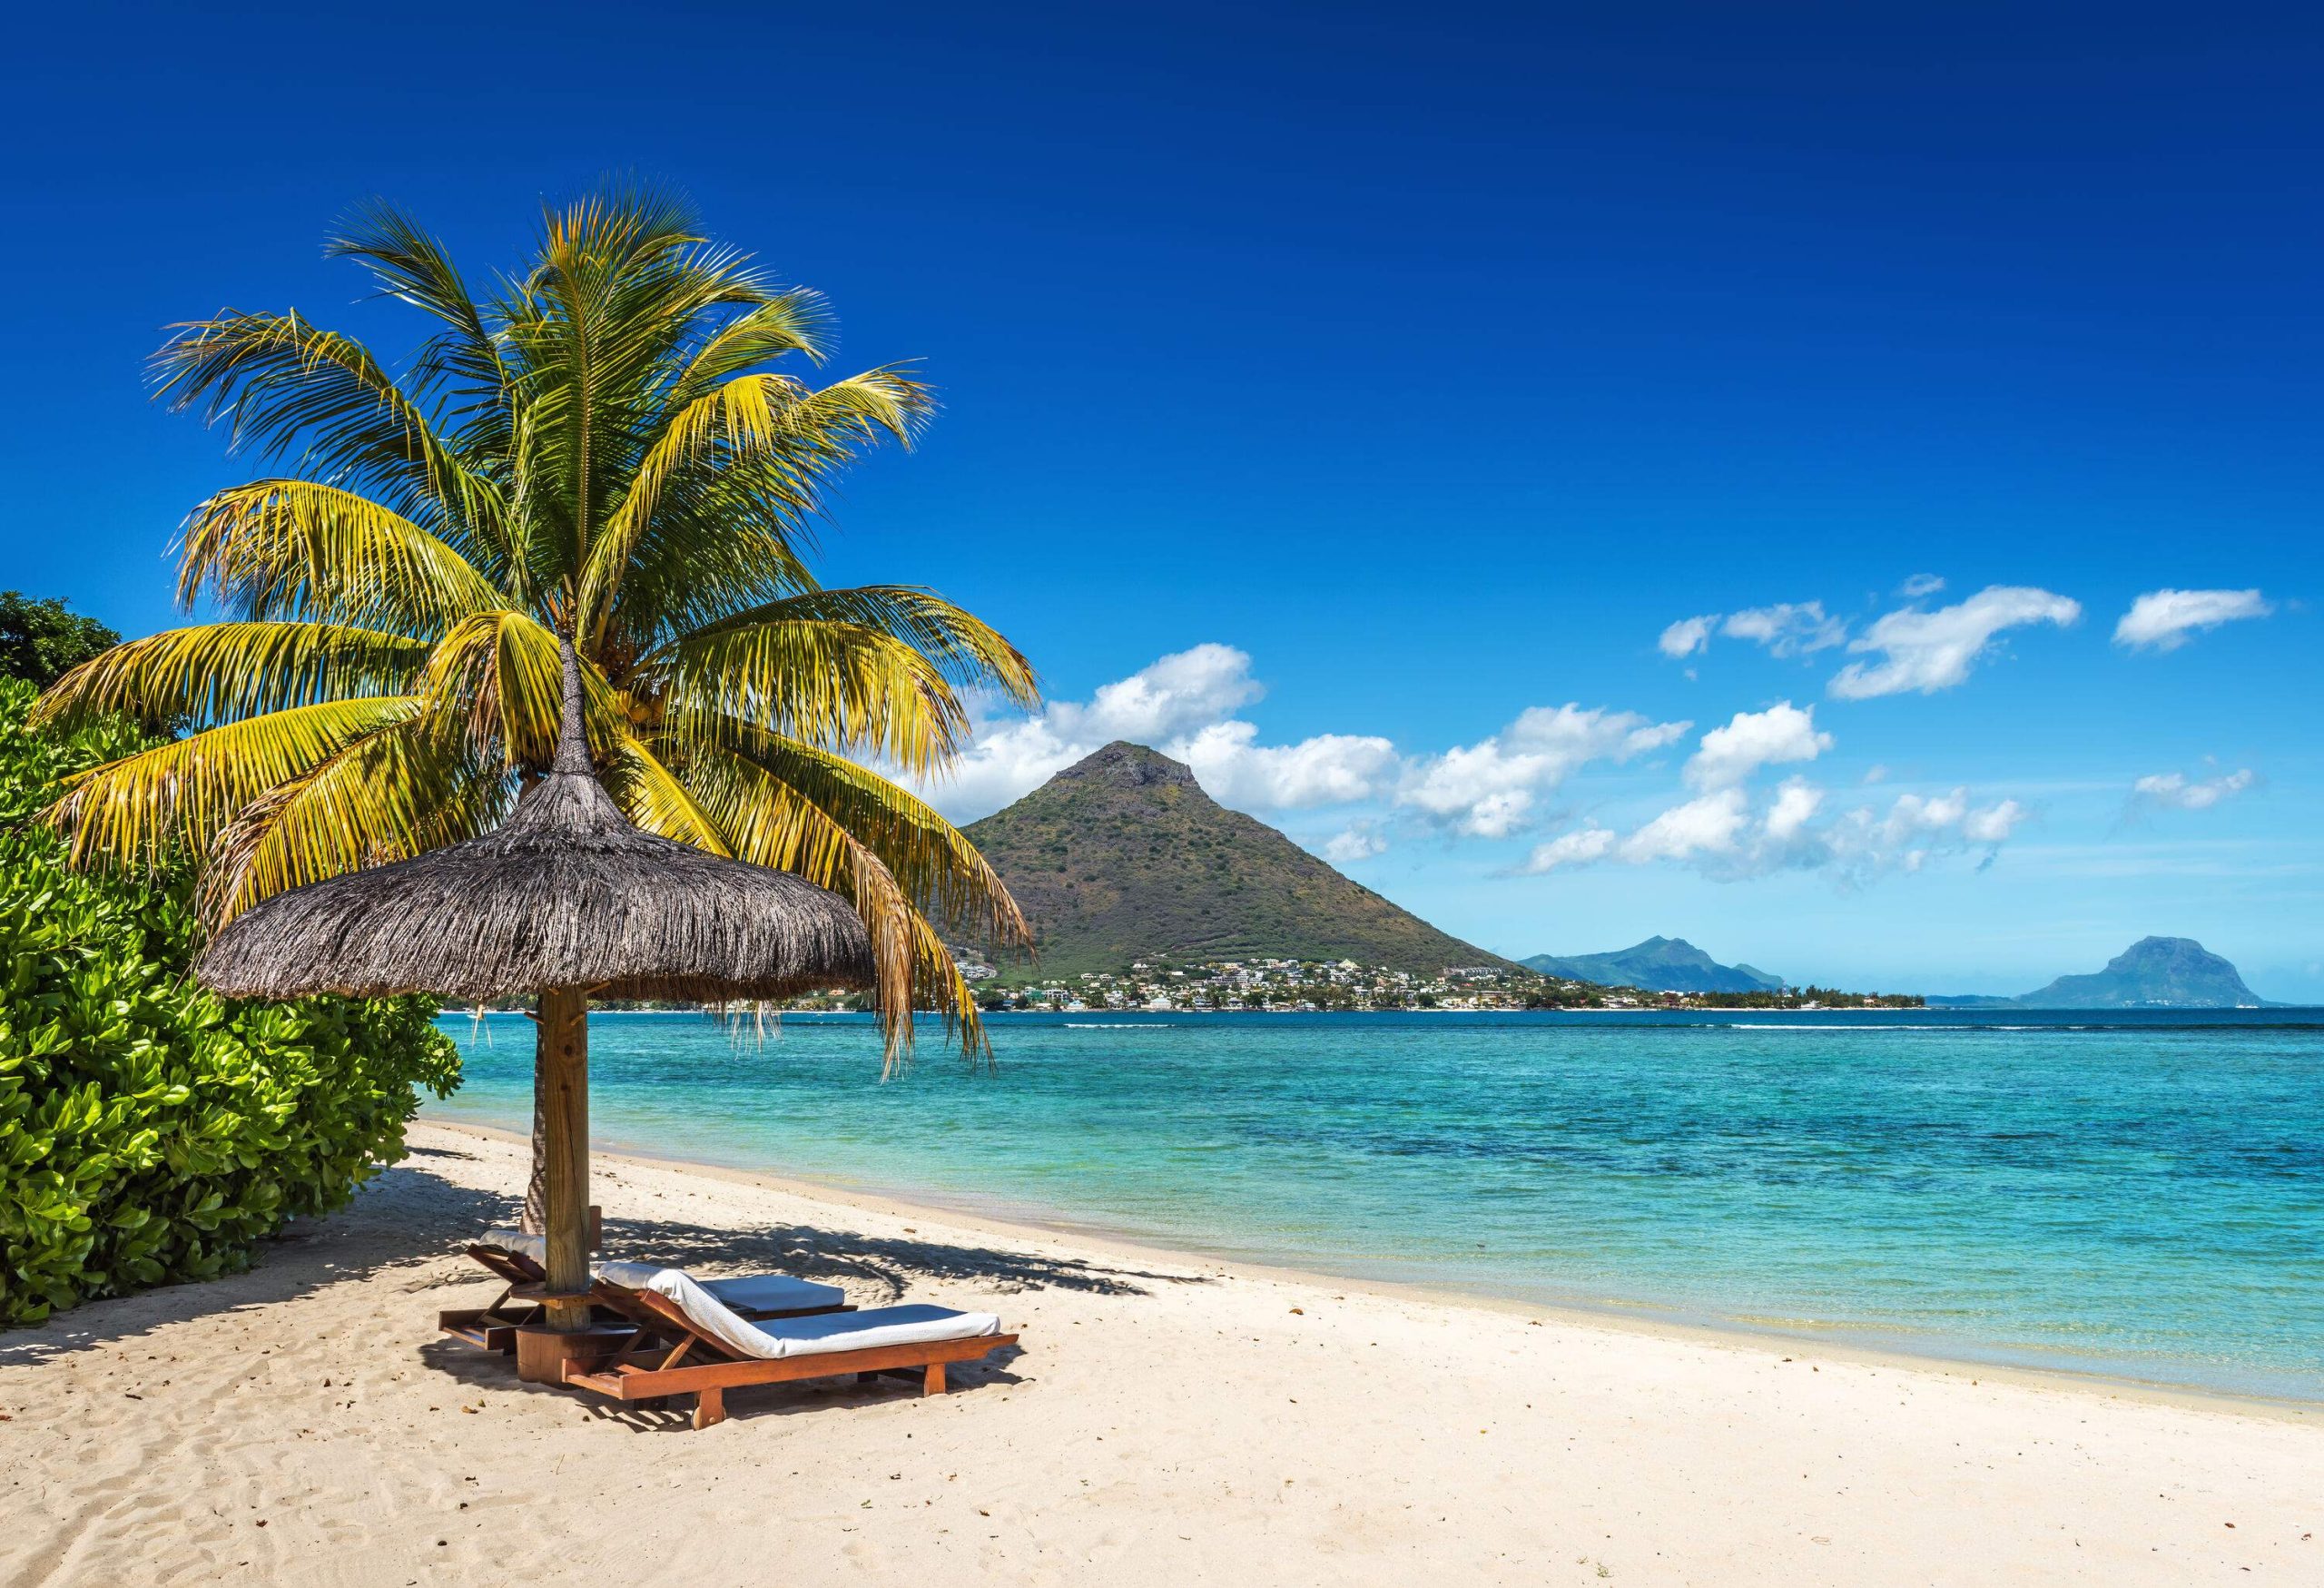 Sunbeds under thatched umbrellas beside a palm tree on a beach in front of a turquoise ocean.